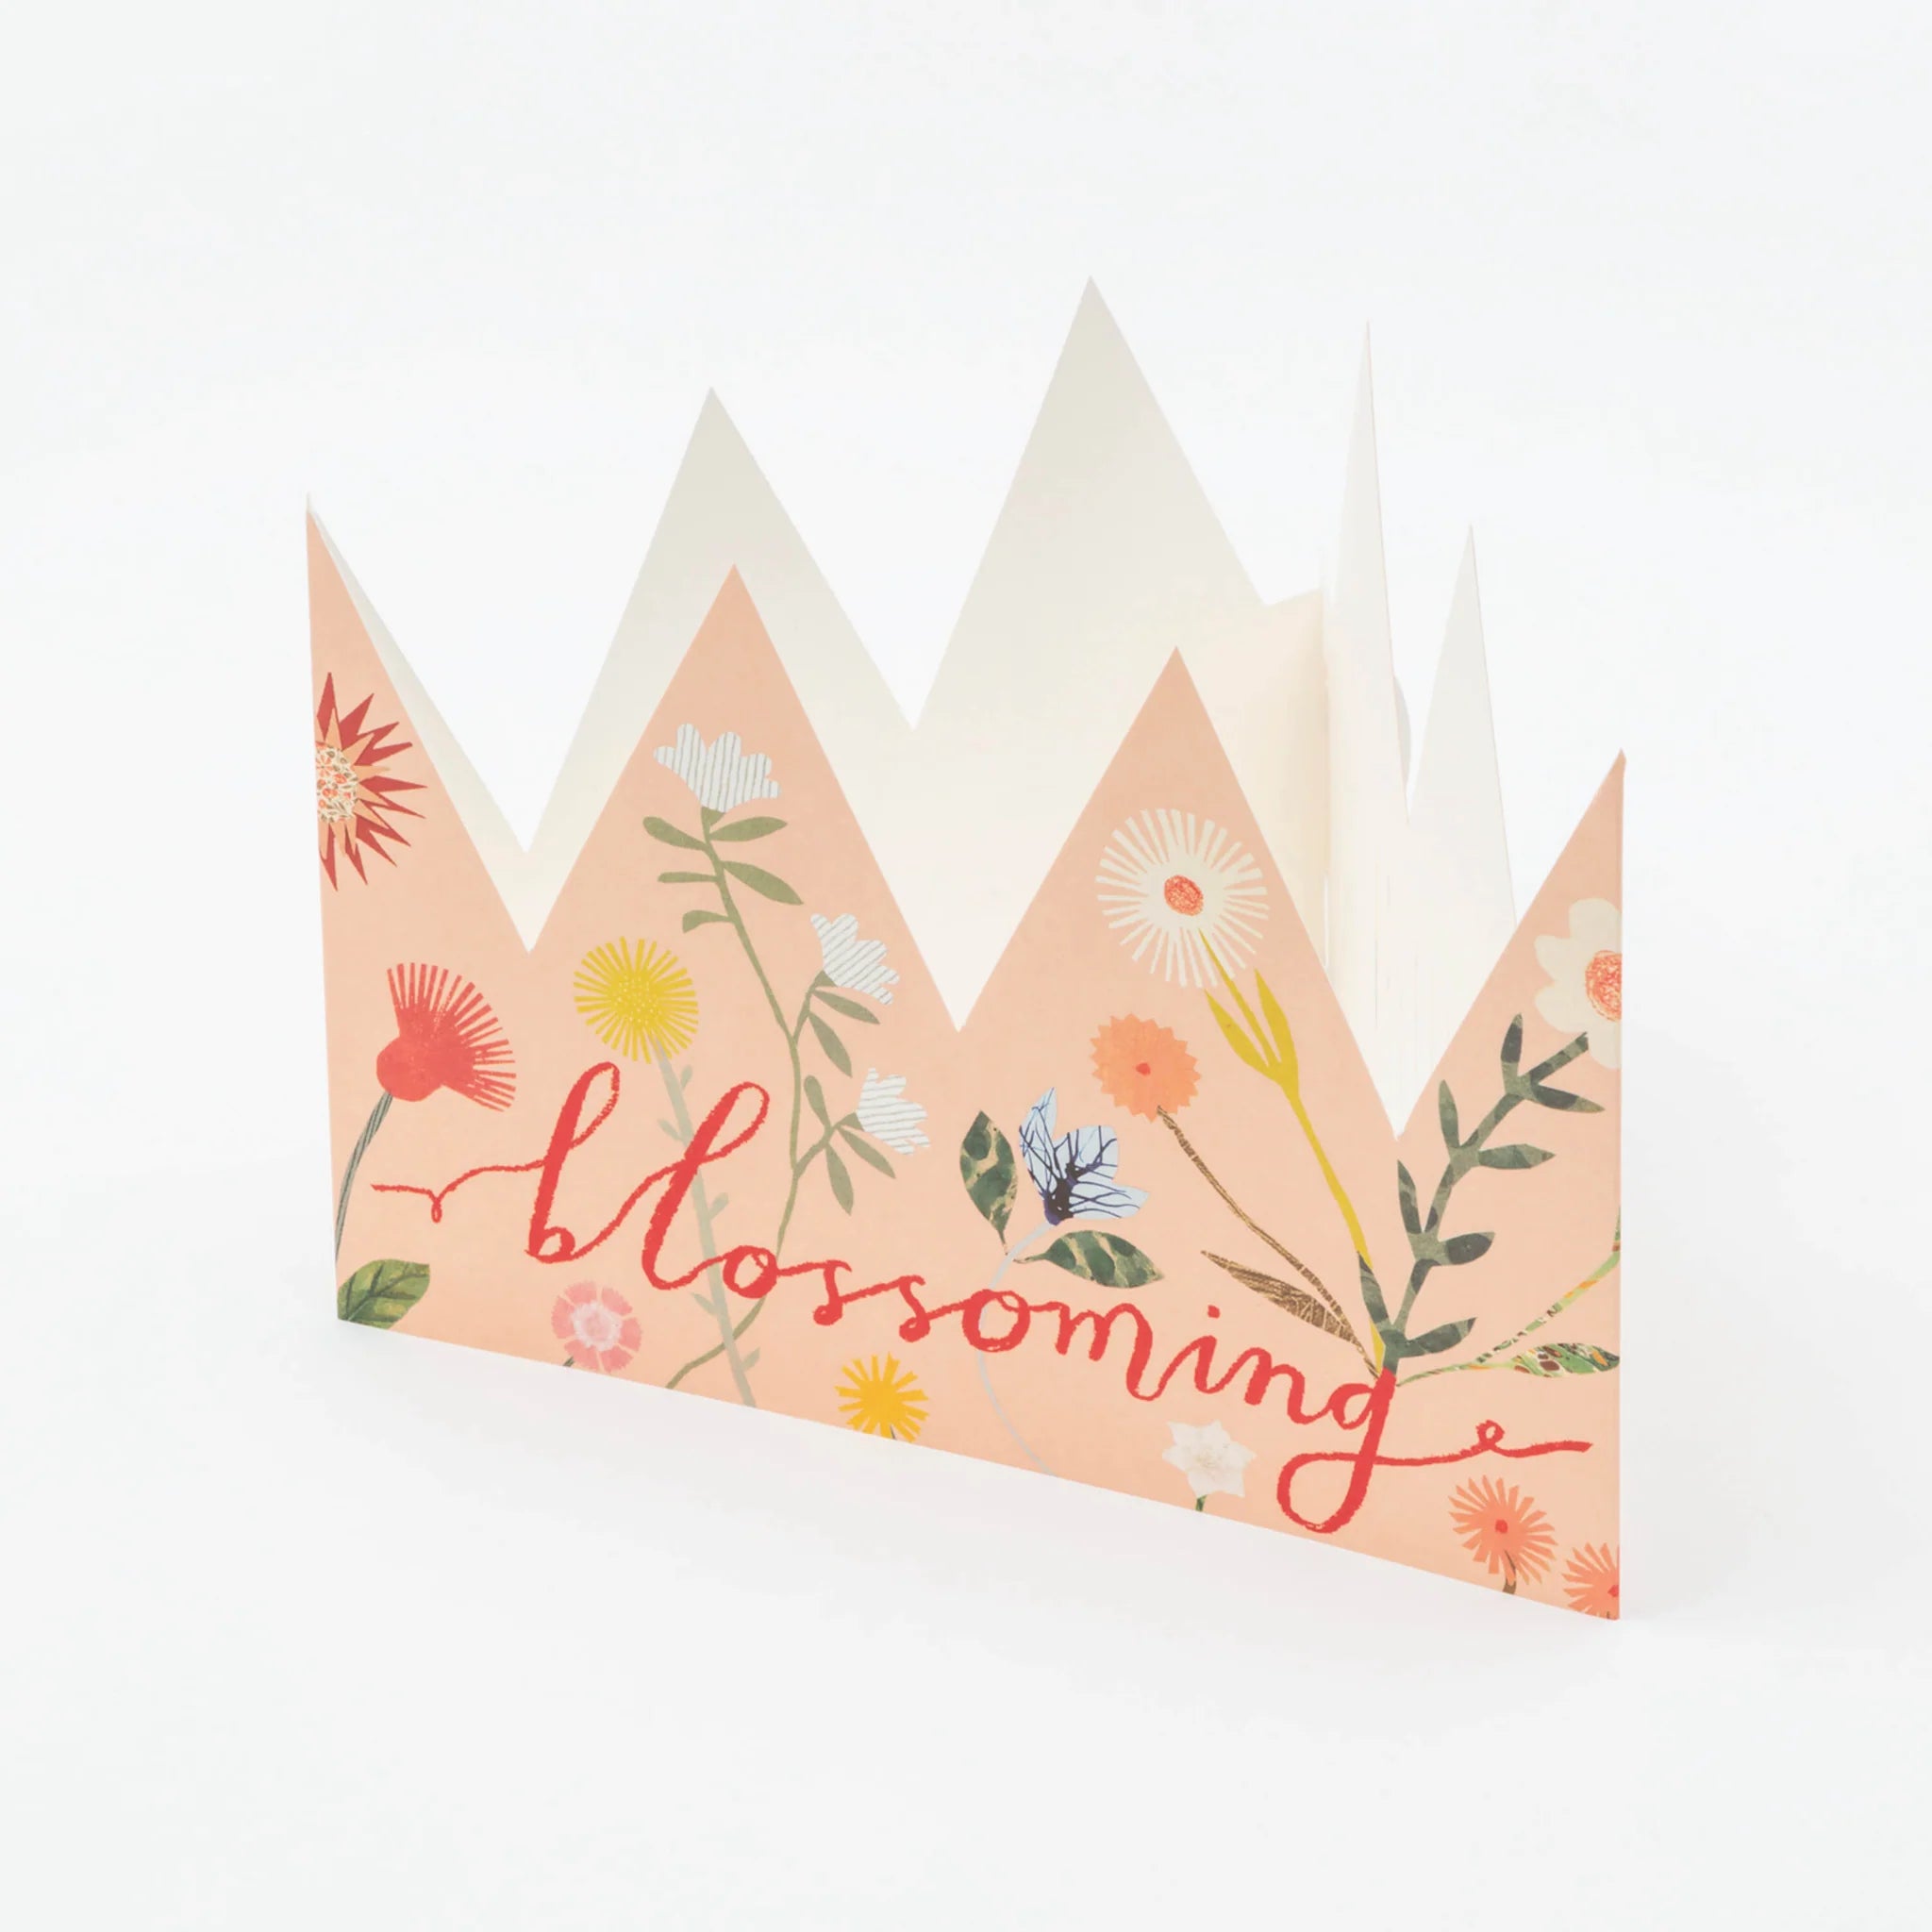 'Blossoming' Party Hat Greetings Card